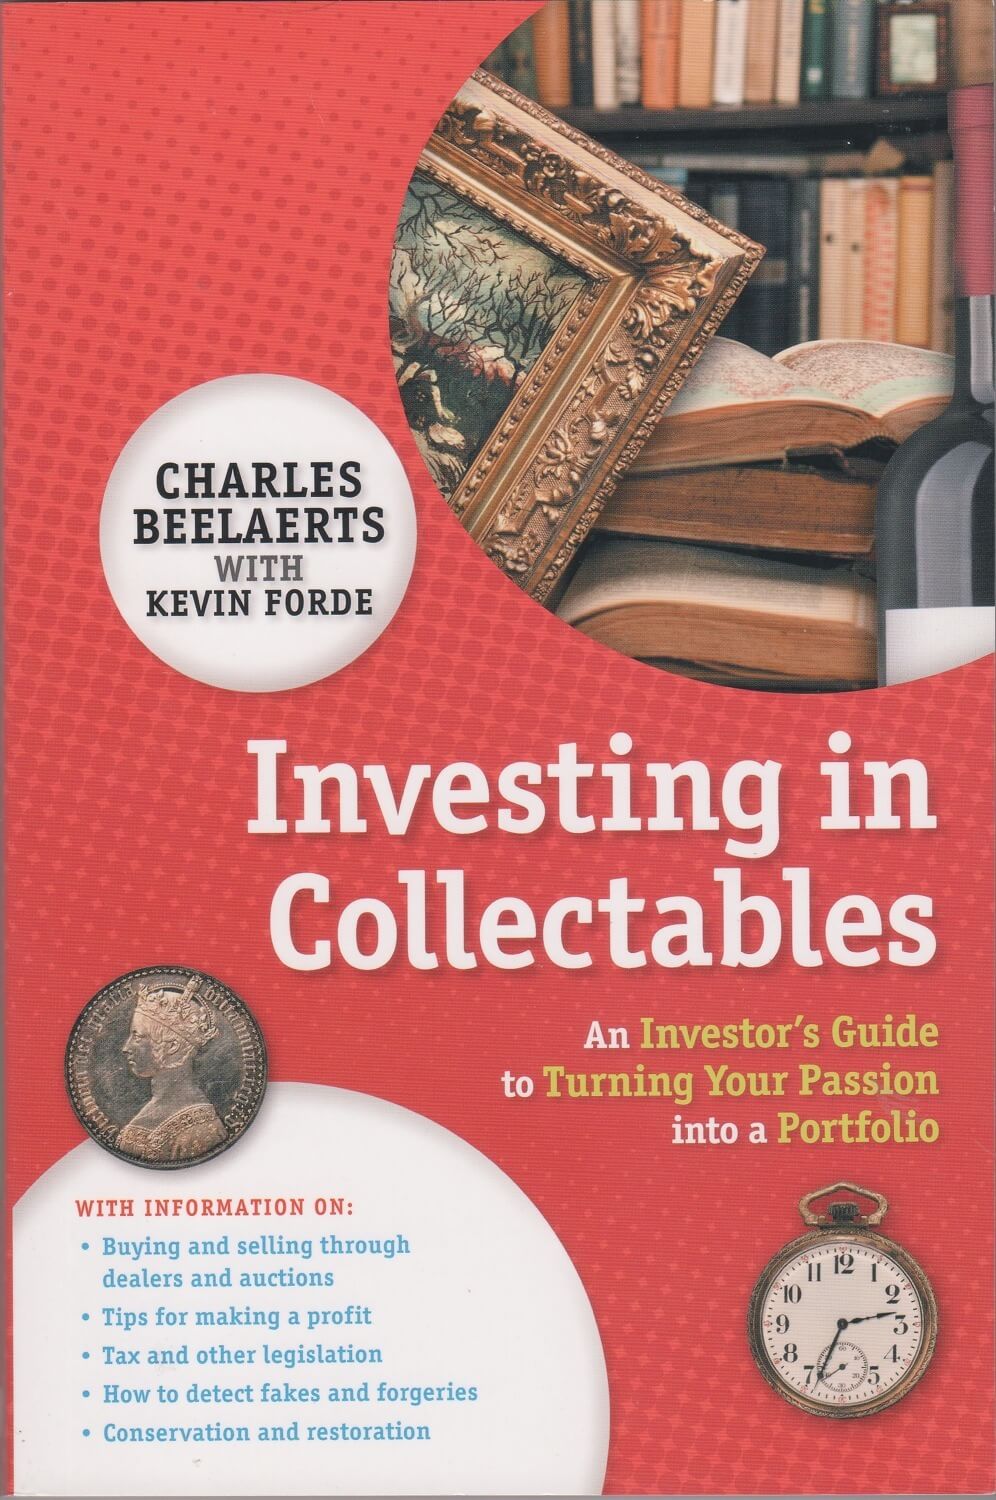 Investing In Collectables An Investor's Guide To Turning Your Passion Into A Portfolio product image